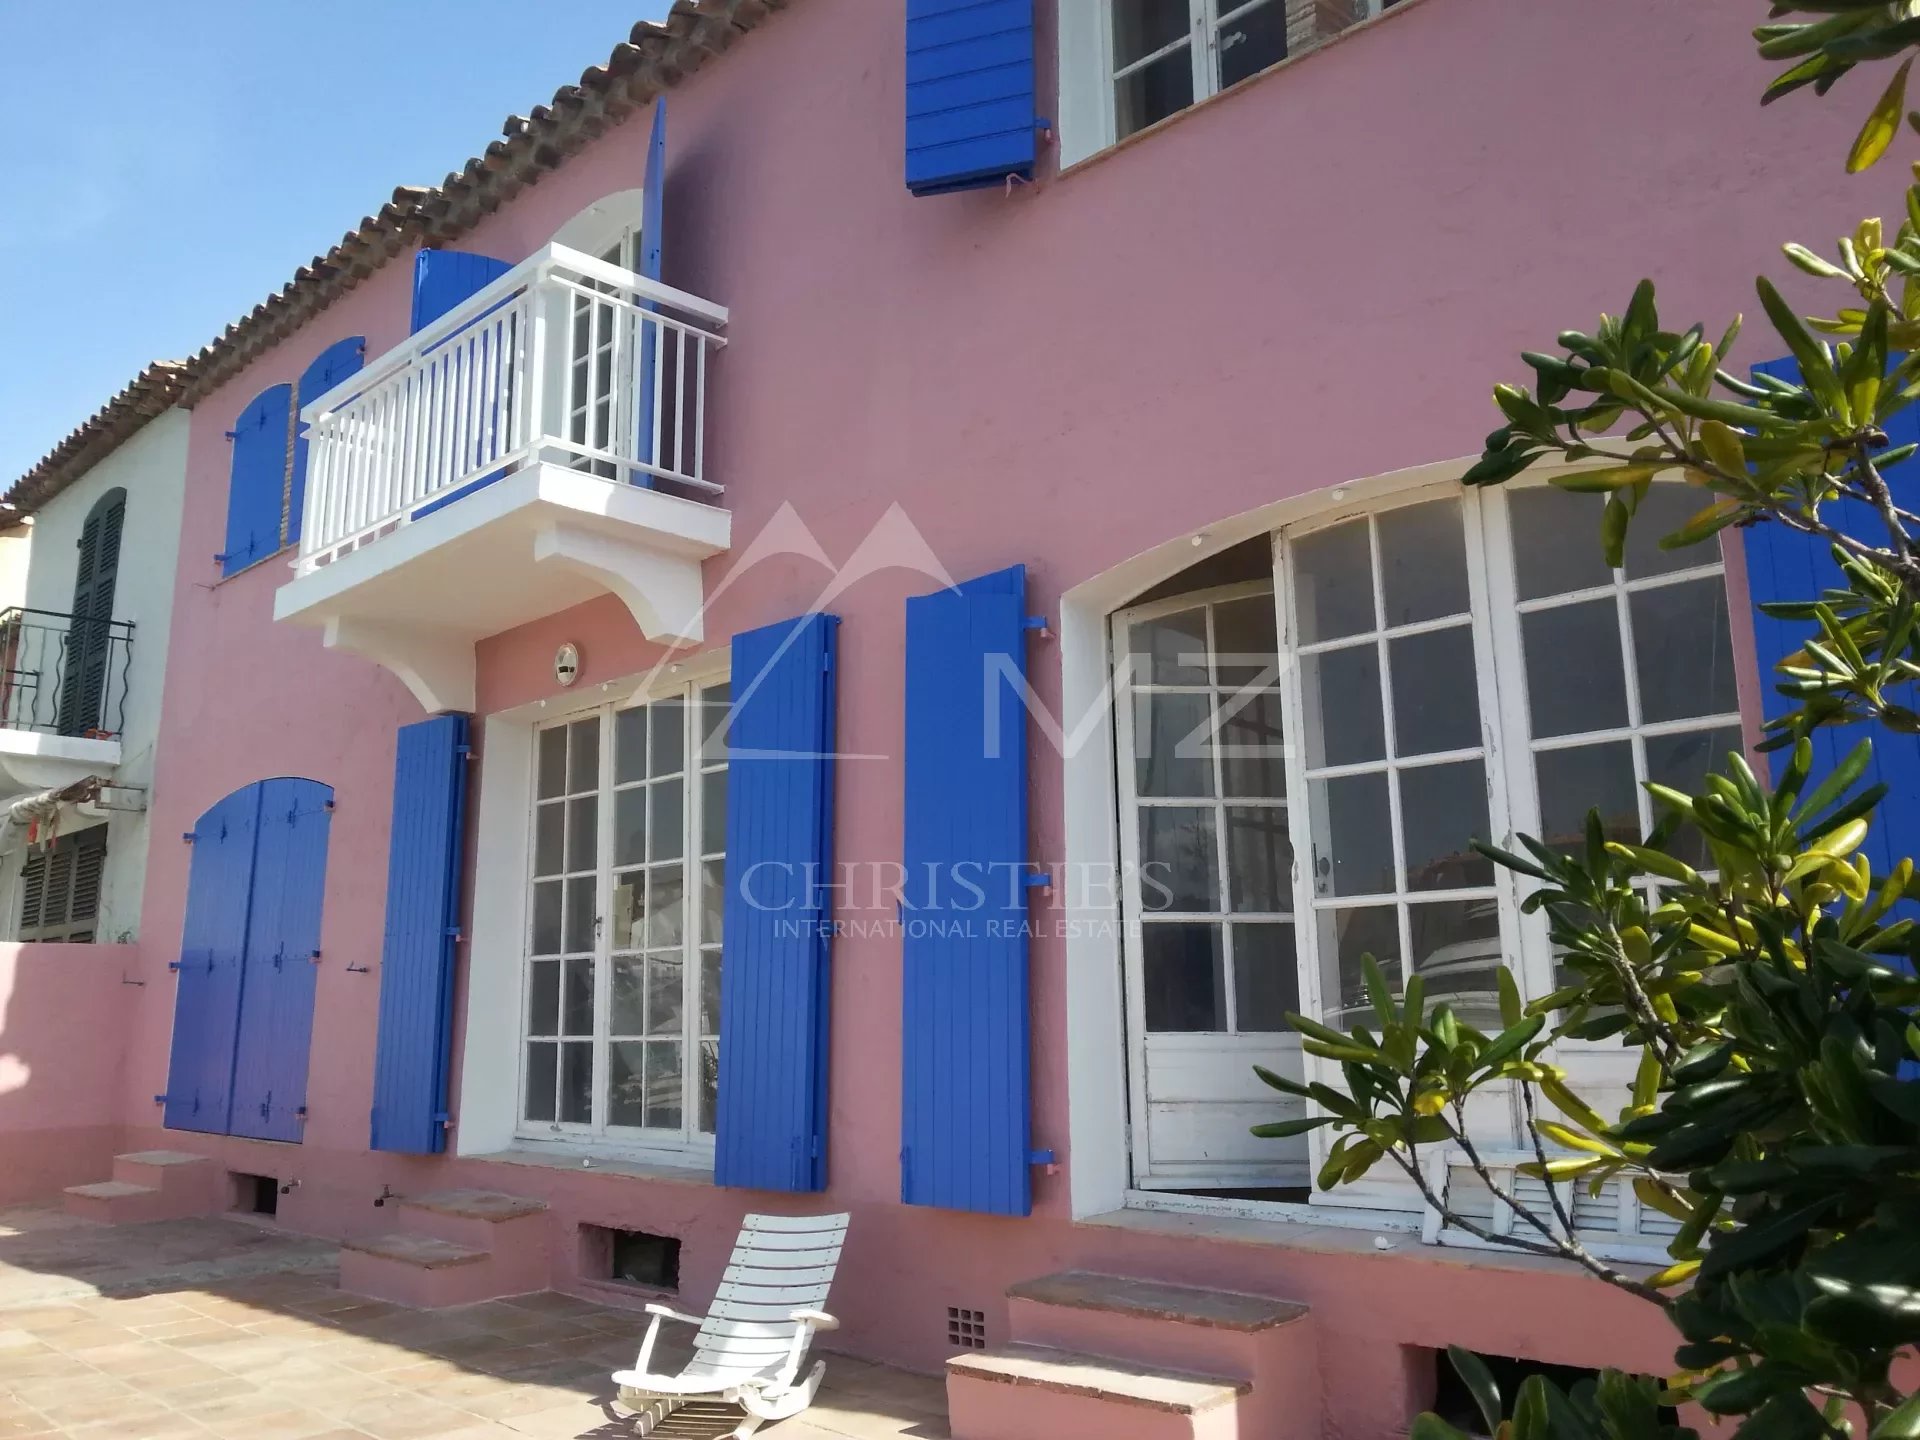 Village house with harbour square - High potential - Port Grimaud